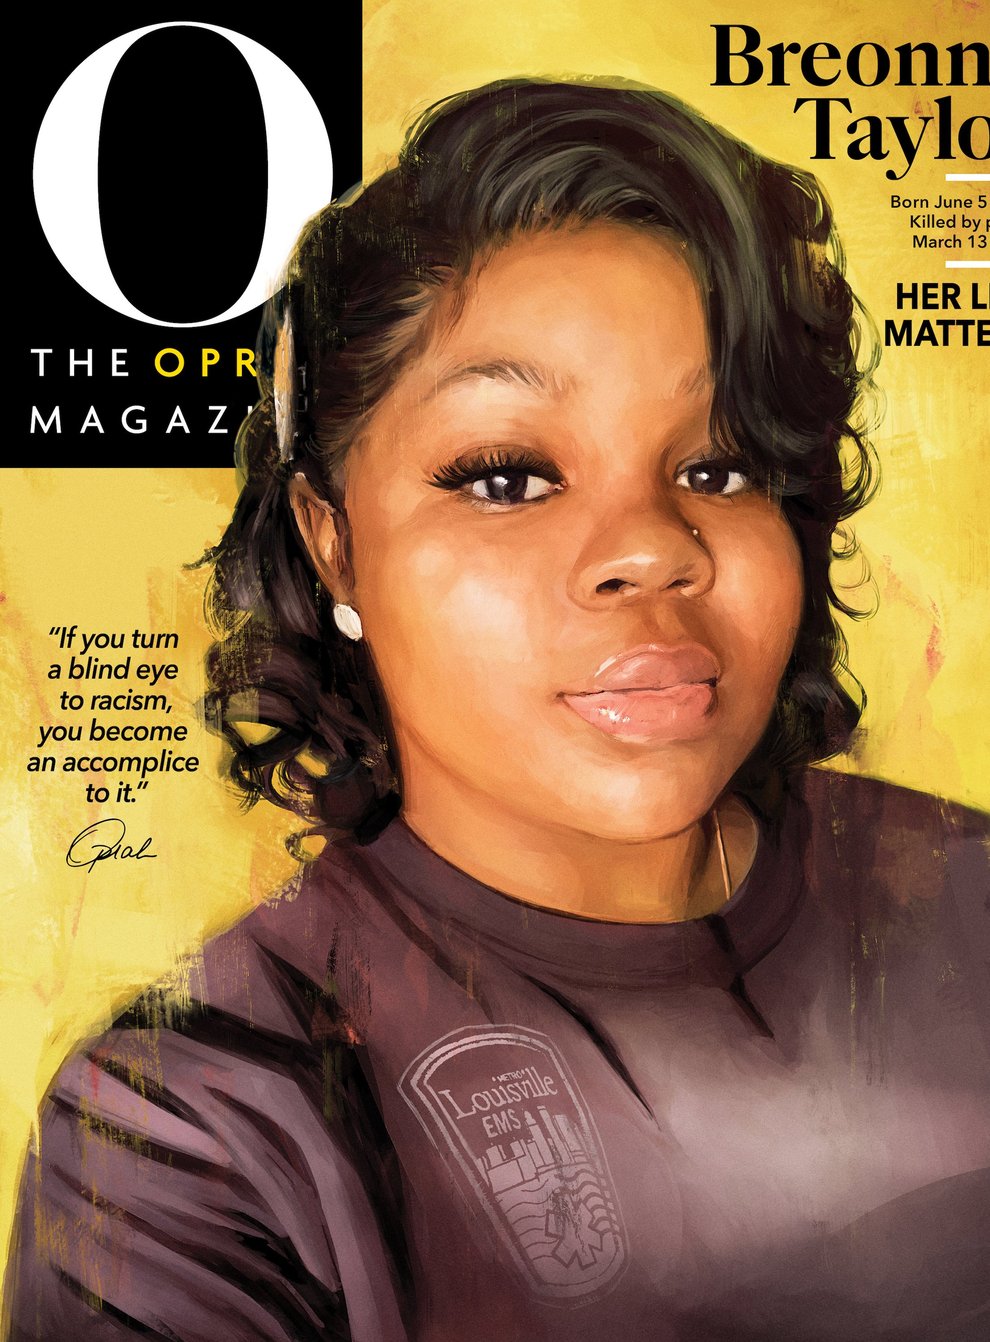 Oprah Winfrey has given up her cover spot on 'O' magazine and replaced it with Breonna Taylor